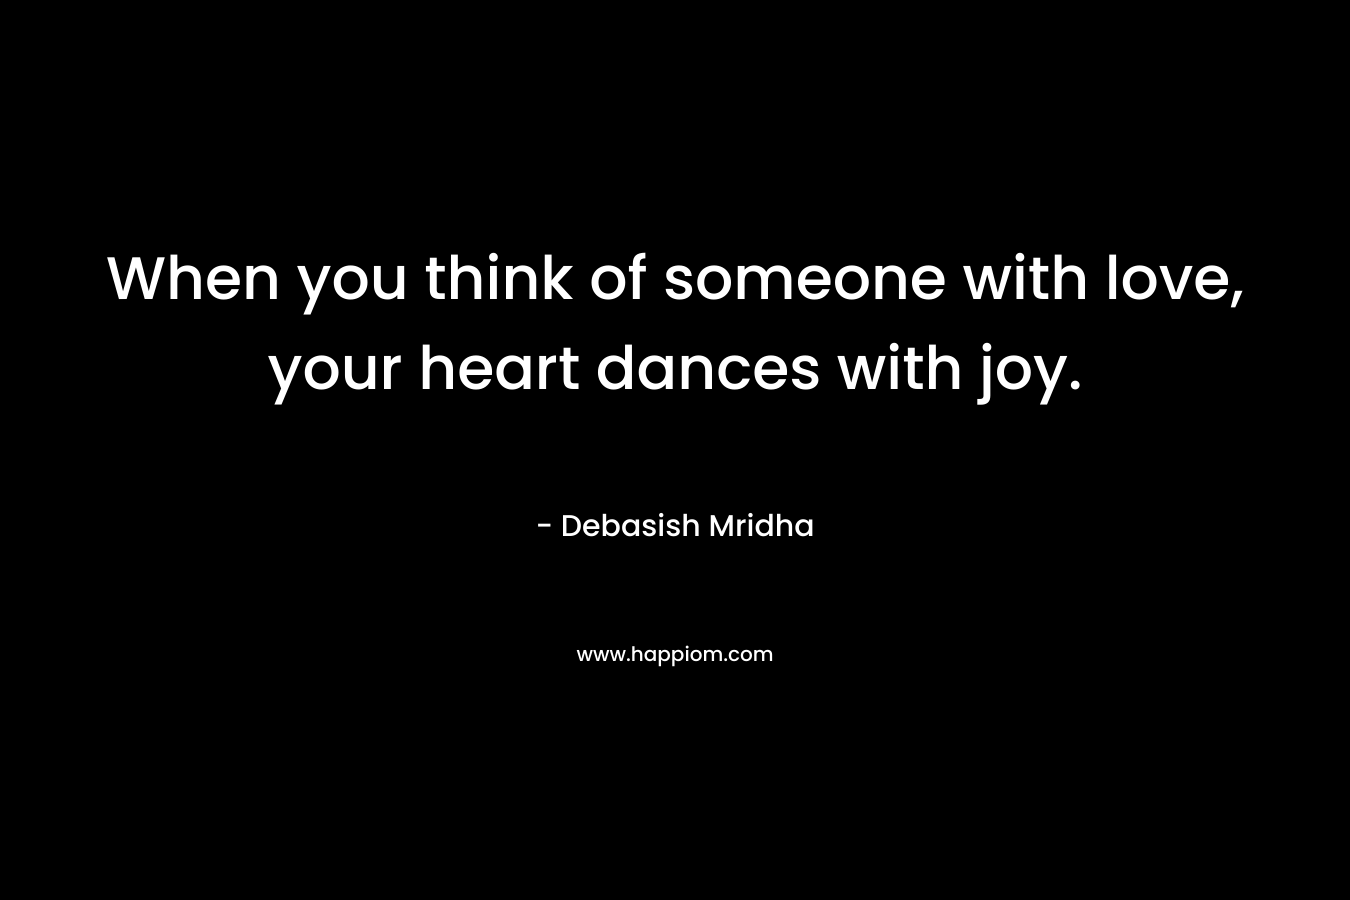 When you think of someone with love, your heart dances with joy.